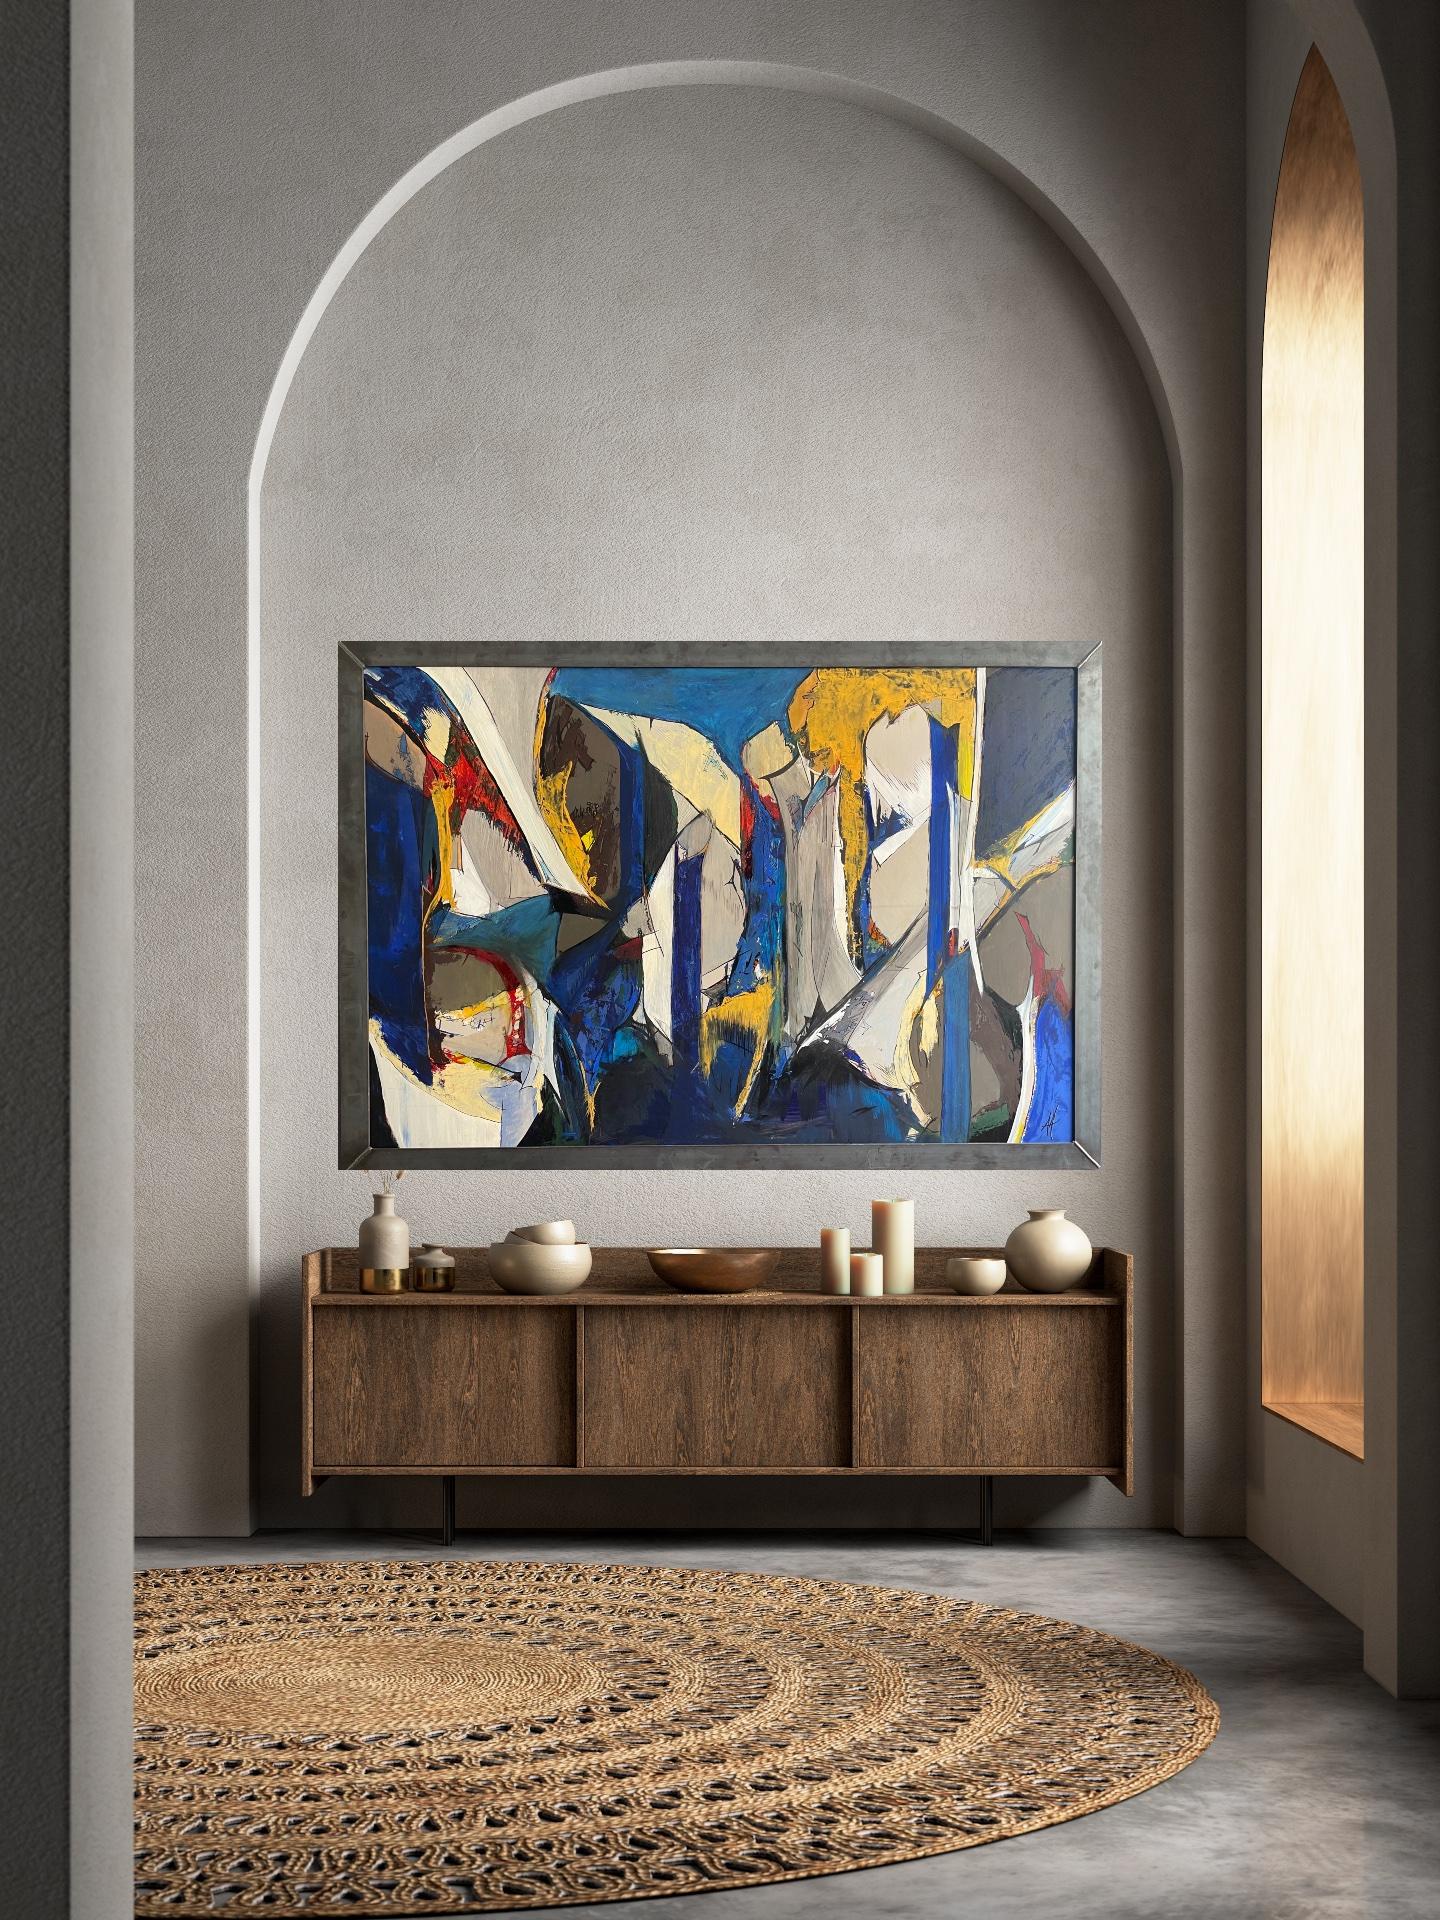 Elevate your space with this vibrant and joyful extra-large abstract composition. Radiating with pulsing energy, the painting boasts a broad color palette ranging from deep blue to red, white, and yellow, making it a stunning addition to any